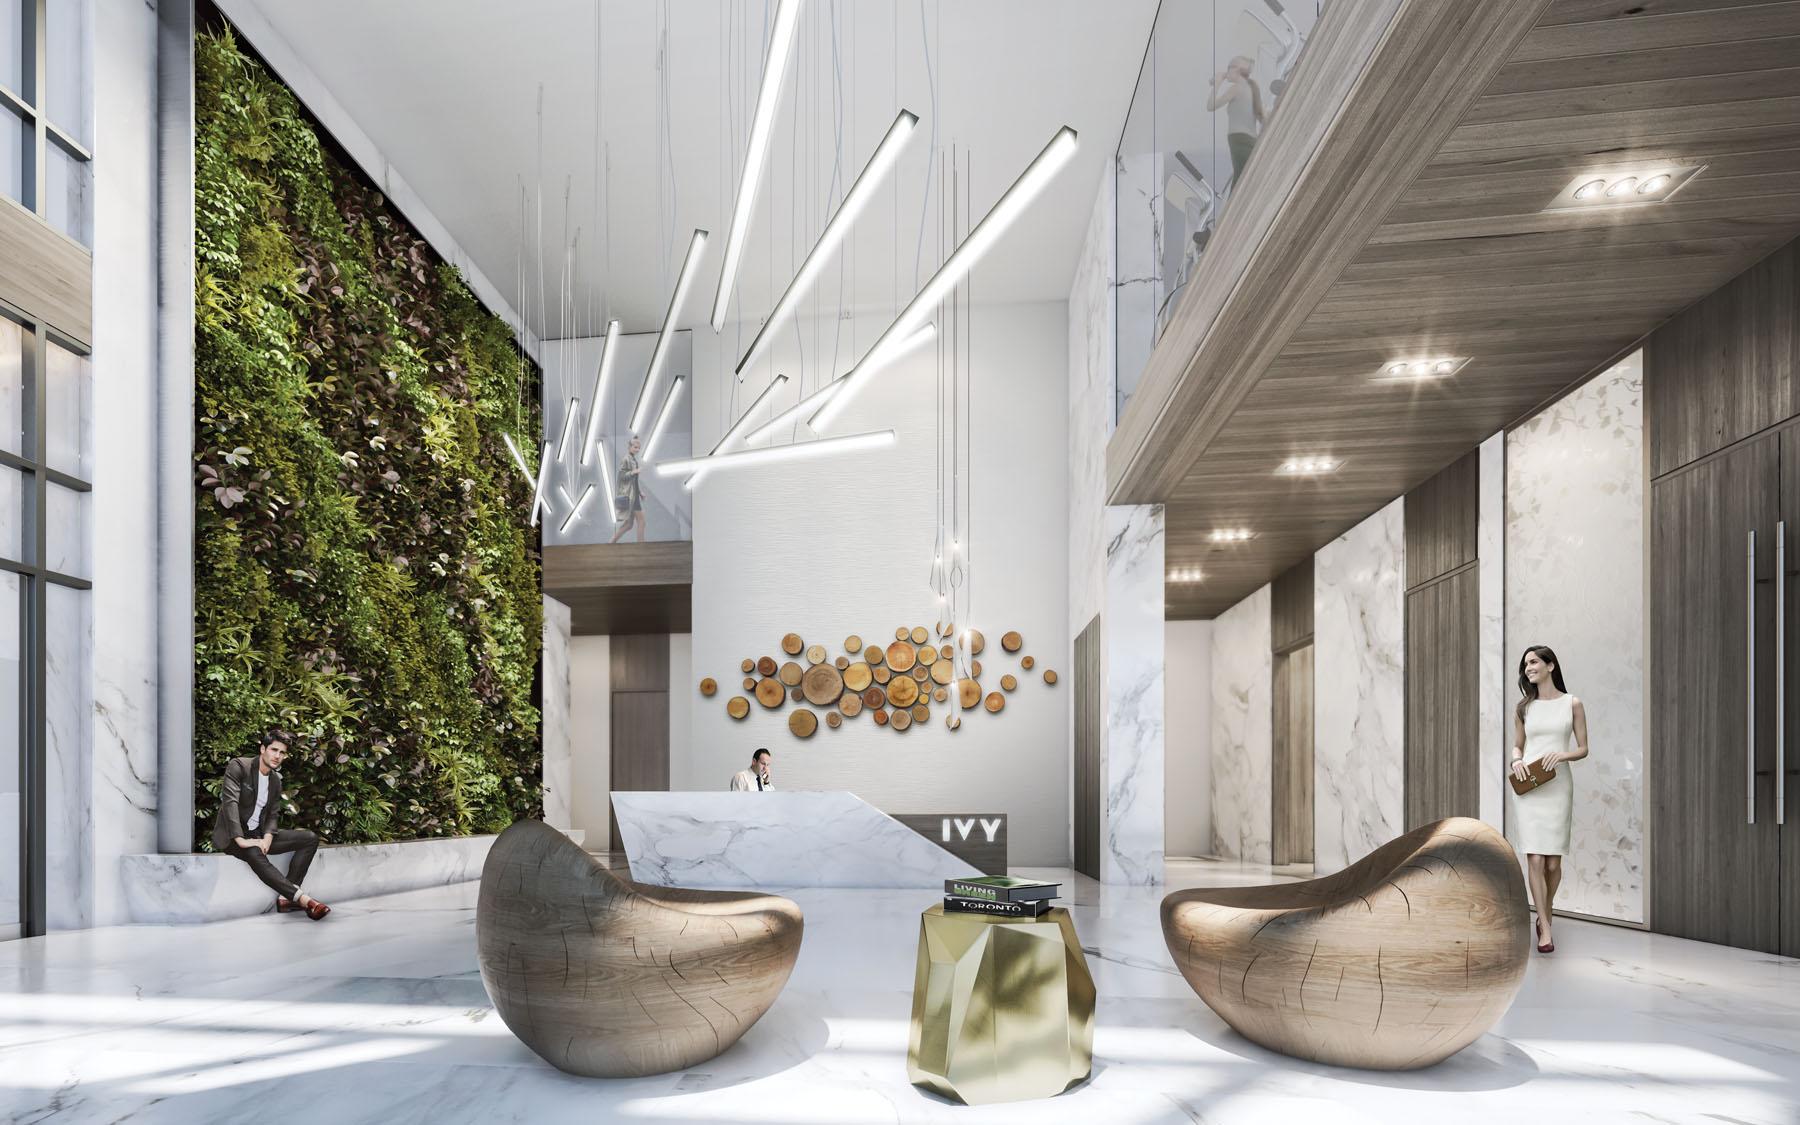 New Rendering Offers Preview Of Interiors At Ivy Condos